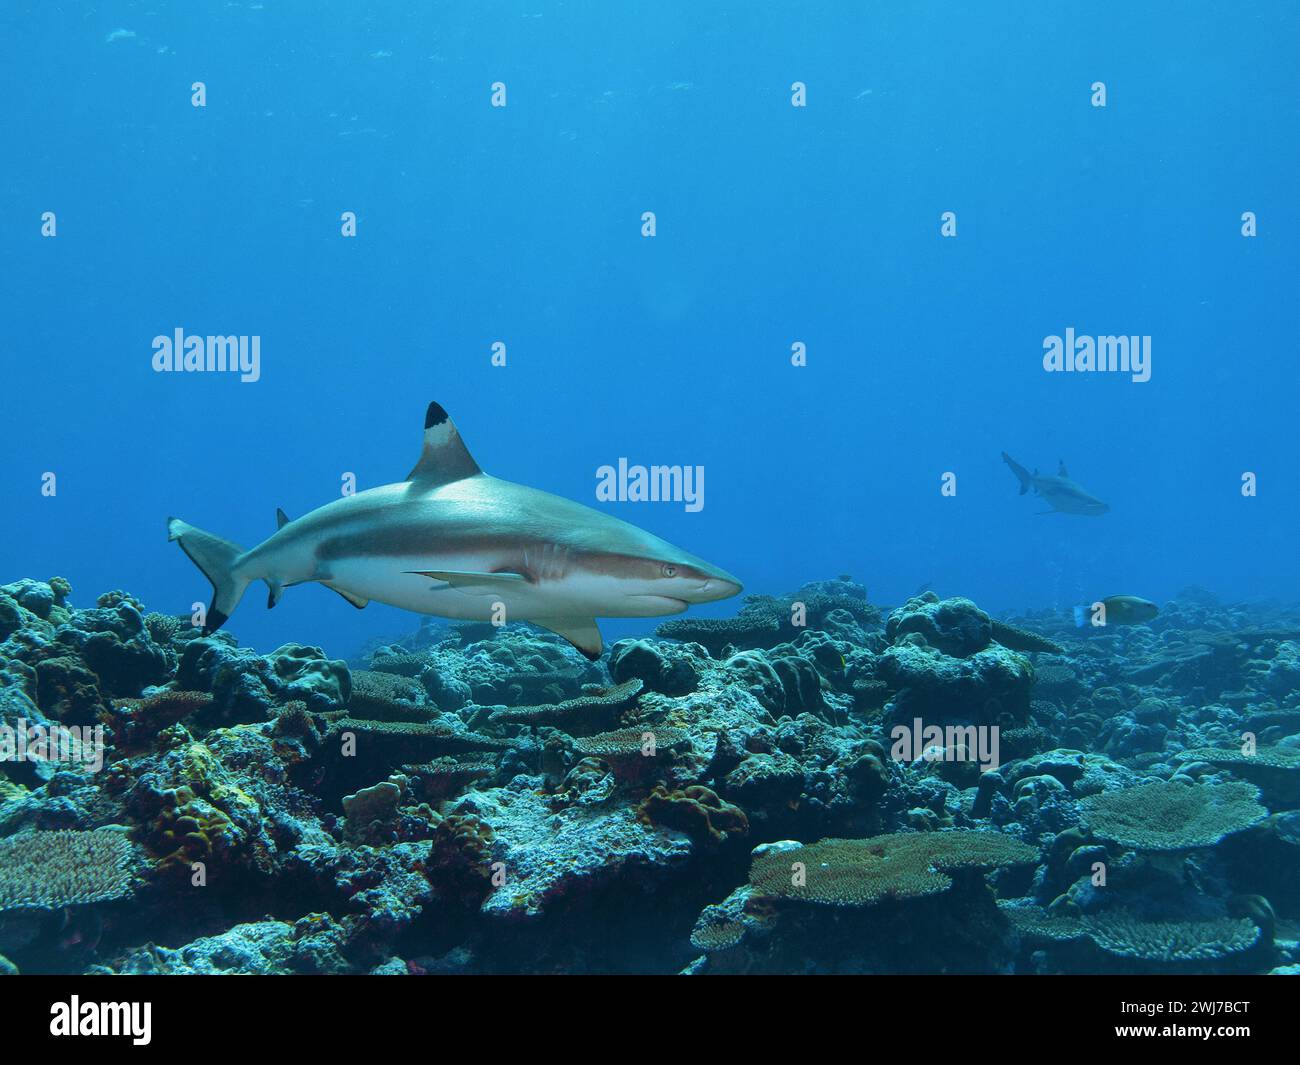 Blacktip reef shark is coming very close. Underwater photography in coral reef at Divespot Vertigo on Yap Island in Micronesia - Pacific Ocean. Stock Photo